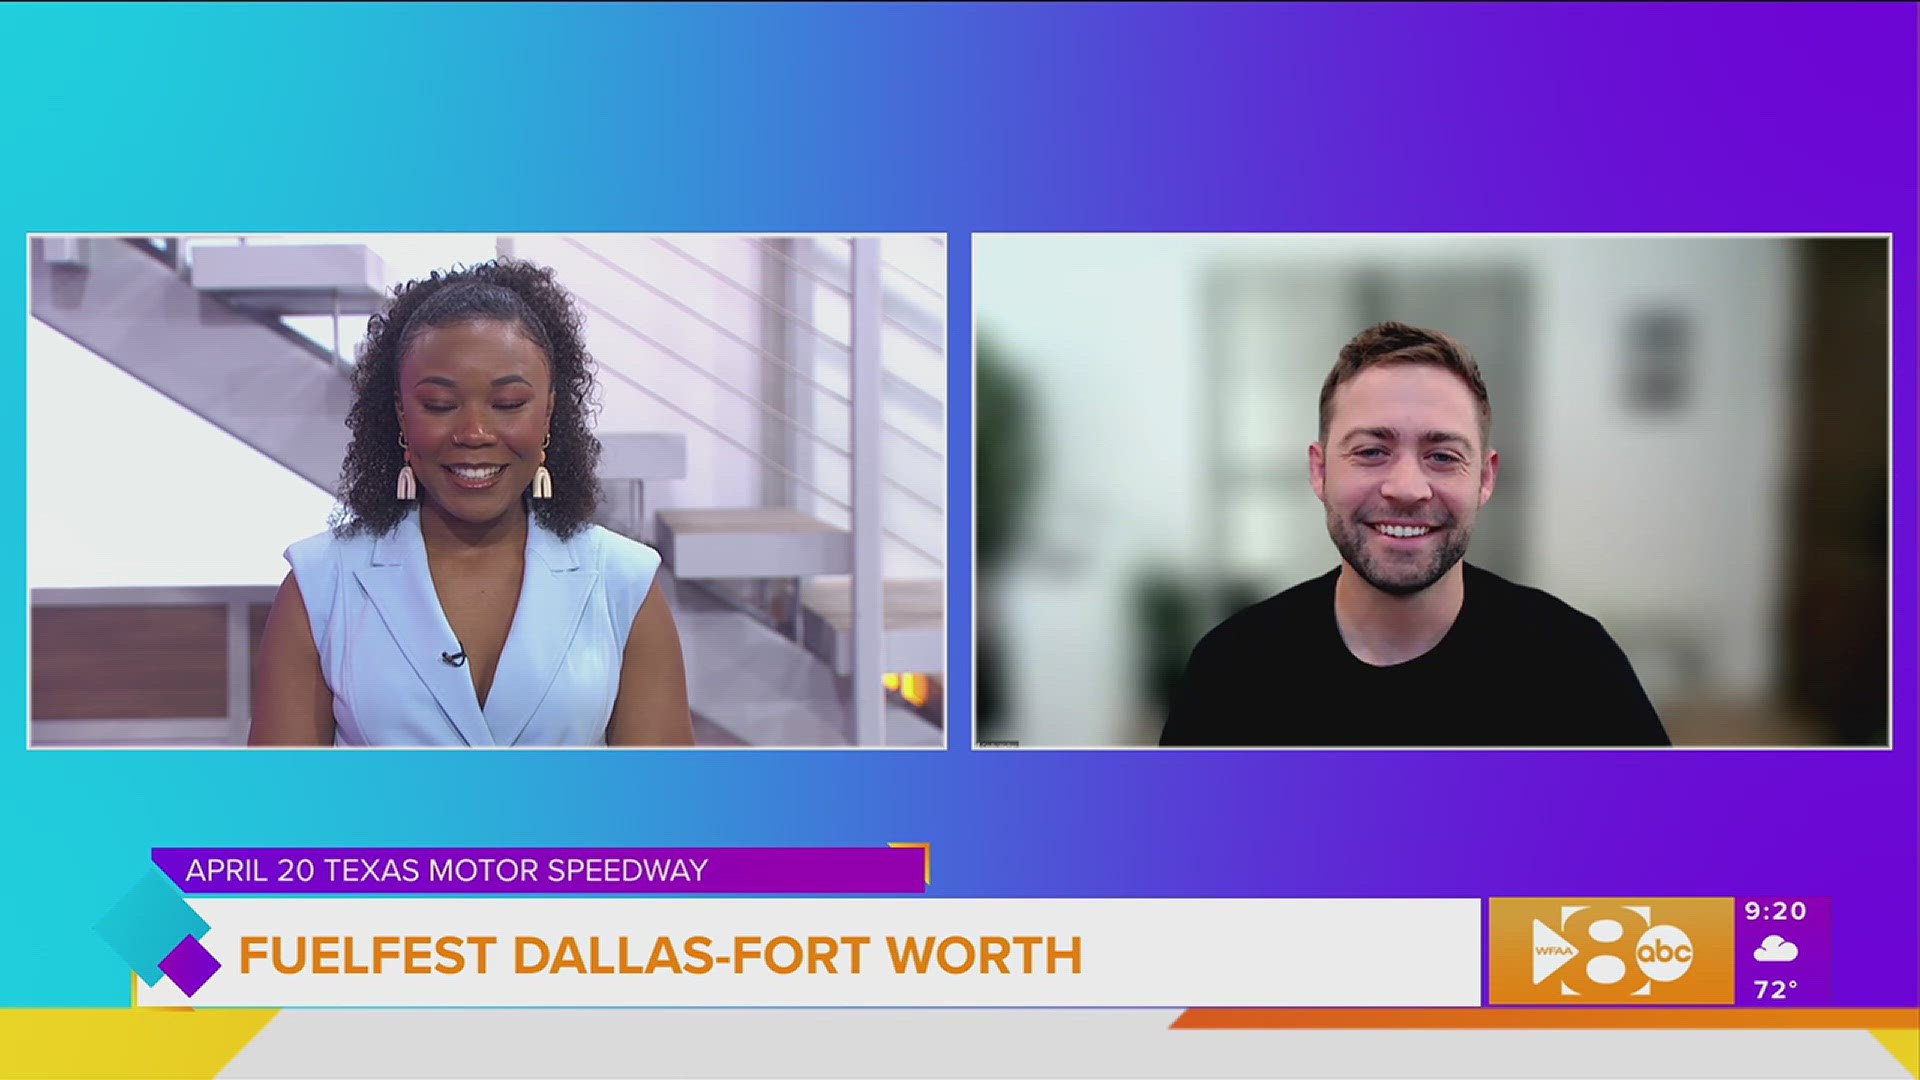 Cody Walker, brother of the late Paul Walker from Fast & Furious franchises talks about this year’s FuelFest DFW at Texas Motor Speedway Saturday, April 20th.